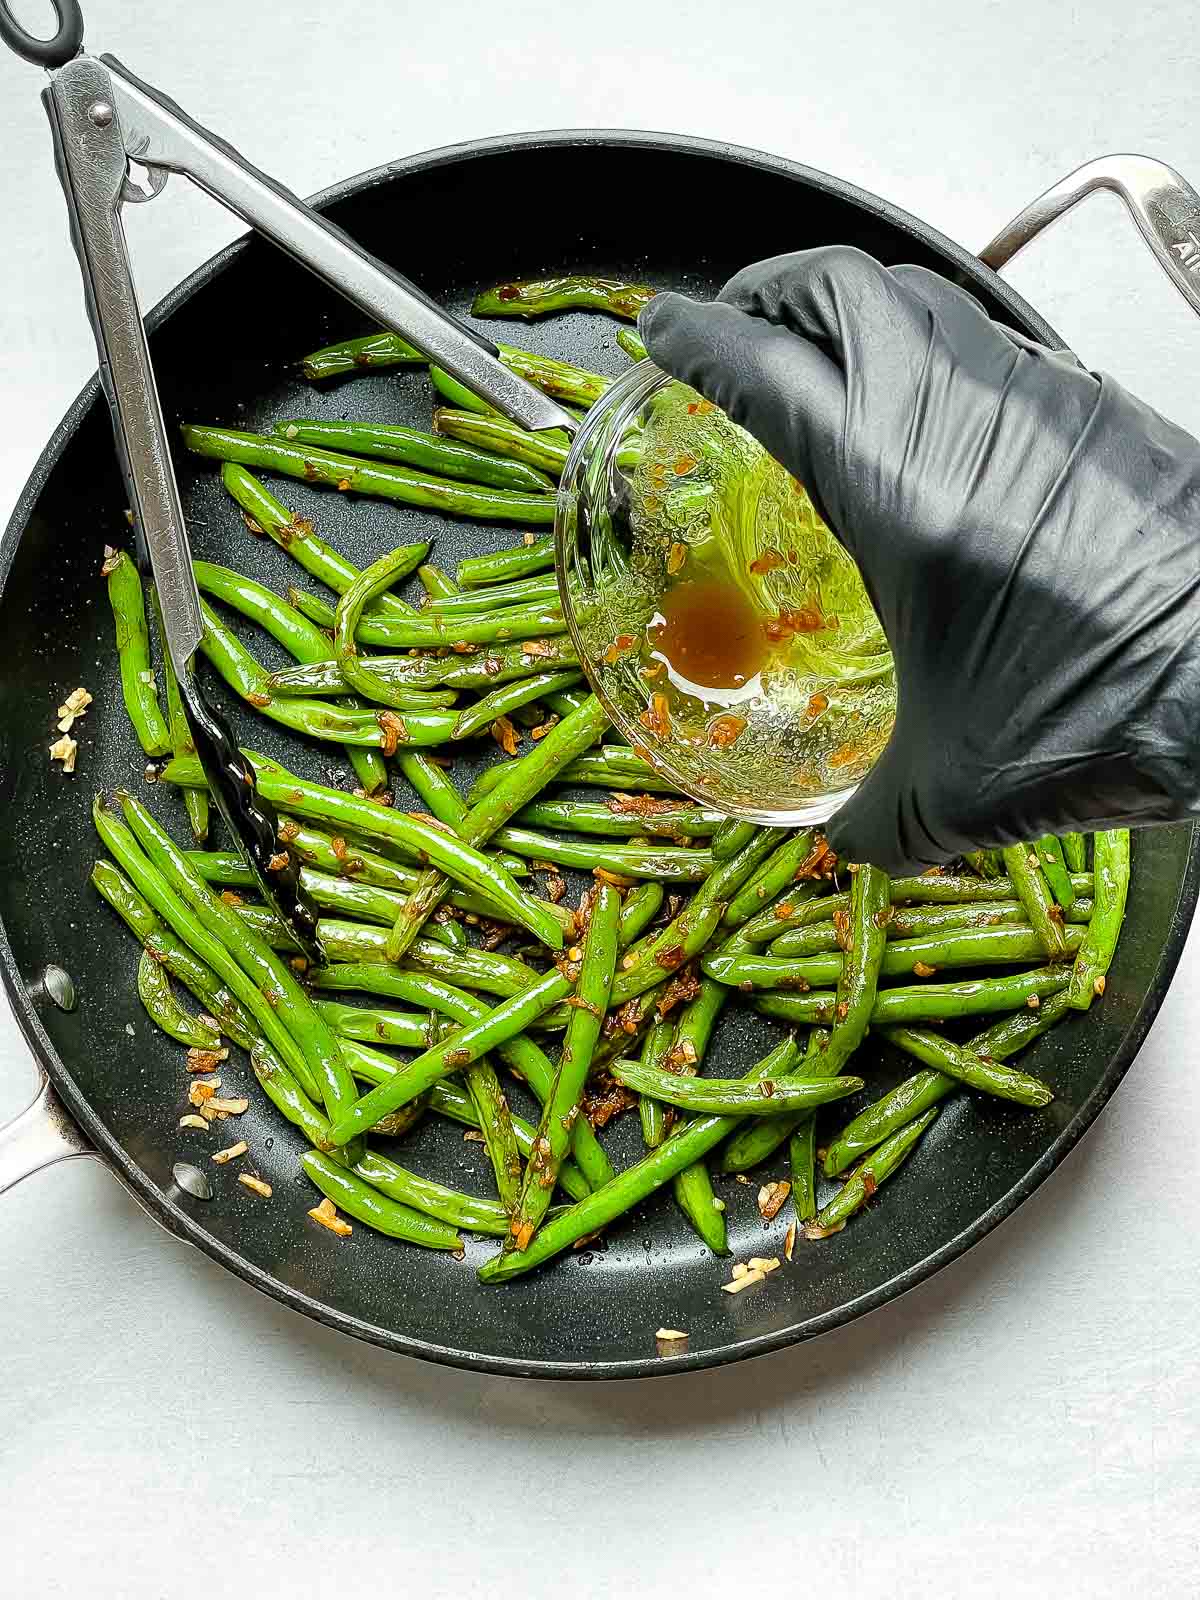 Sauce being poured on top of Chinese Garlic Green Beans sauteeing in a frying pan with tongs inserted.